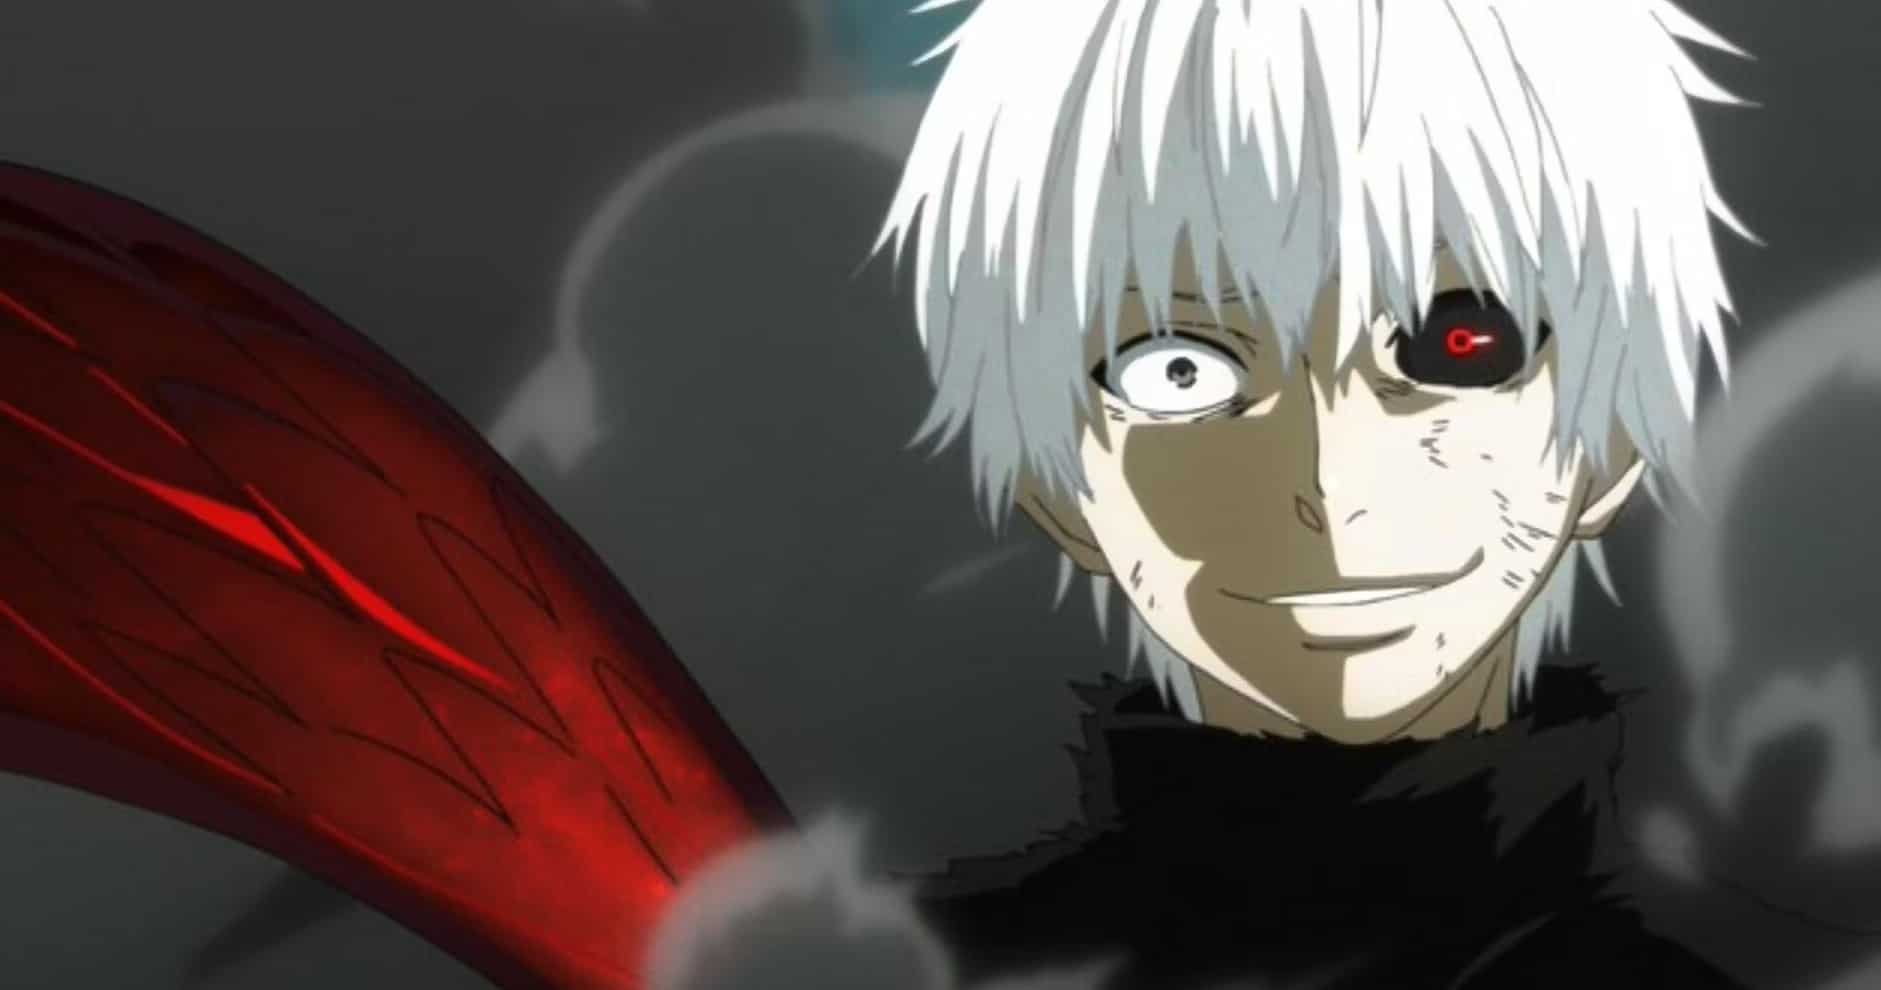 Tokyo Ghoul: The transformation into a ghoul by Ken Kaneki